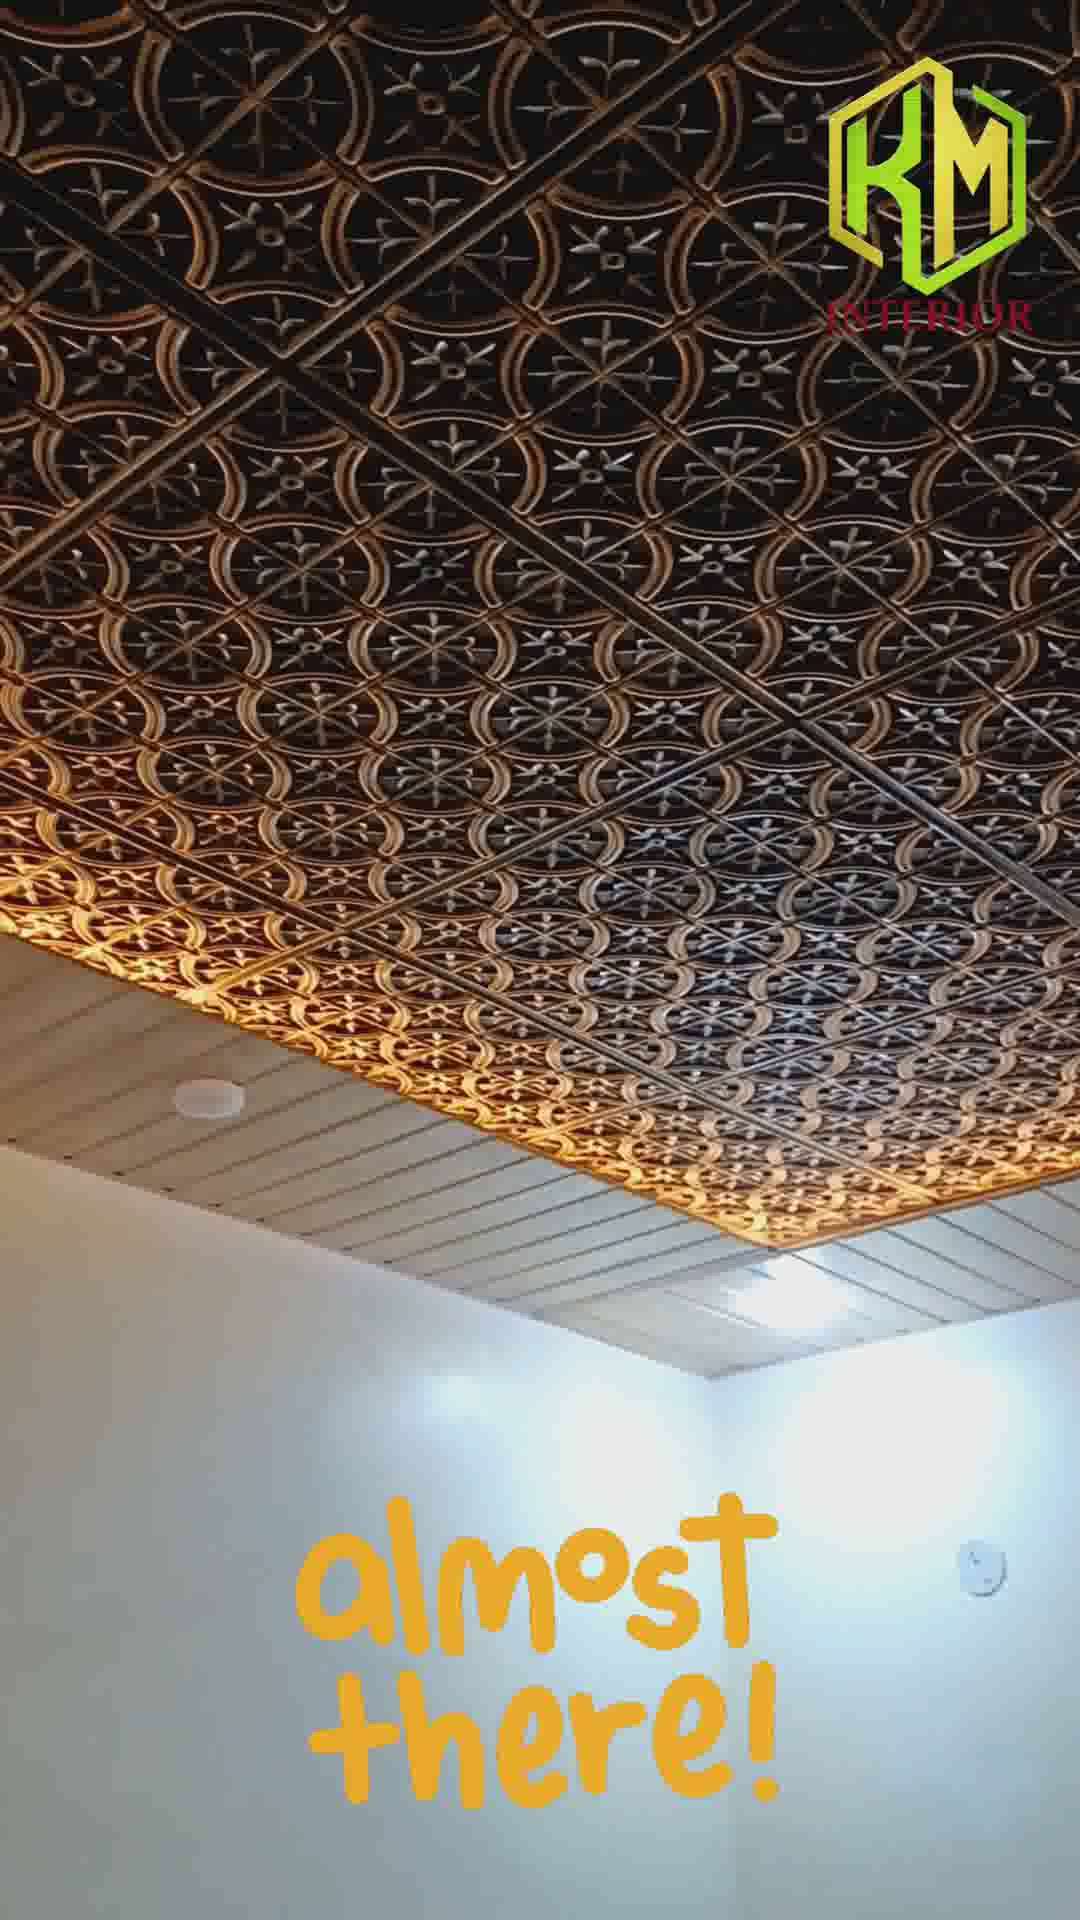 KM INTERIOR BHOPAL M.P. 43
Contact : 8458899288 , 9685481987 #PVCFalseCeiling  #pvcwallpanel  #pvctiles  #pvcpanelinstallation  #wall taxture #WallDesigns  #WallDecors  #CelingLights  #lighting